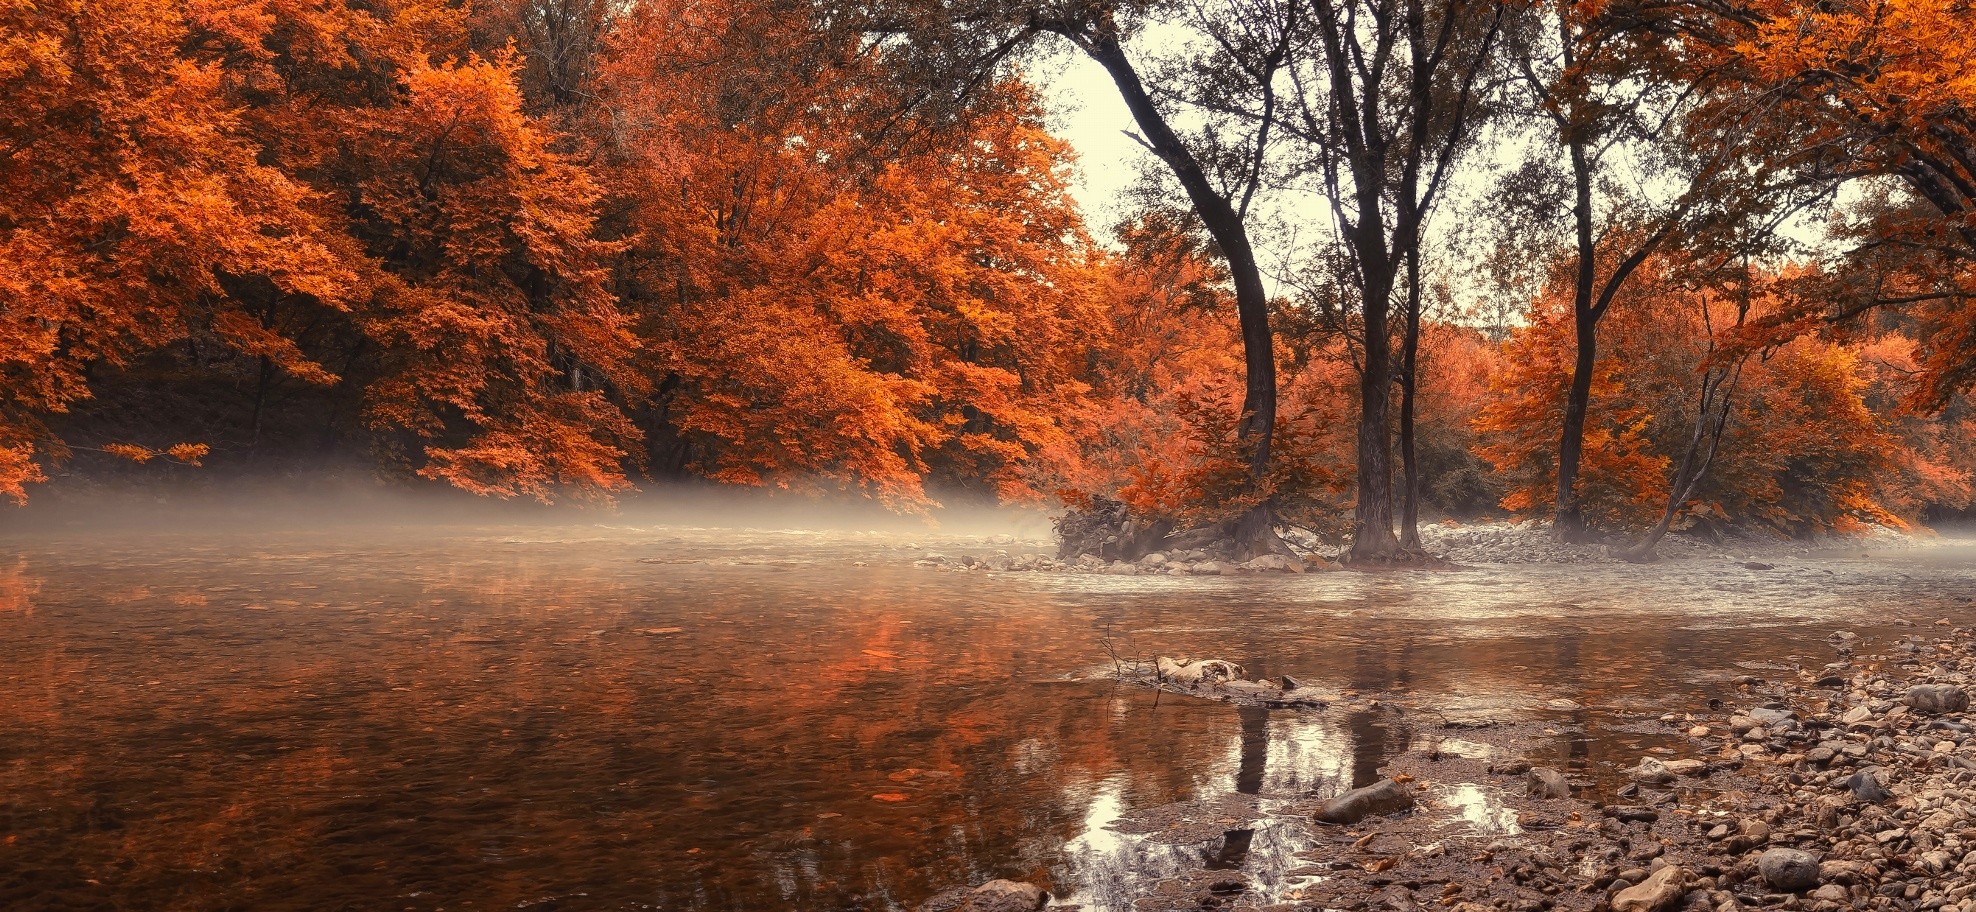 Landscape Nature Fall River Greece Forest Mist Water Trees Amber 1976x912